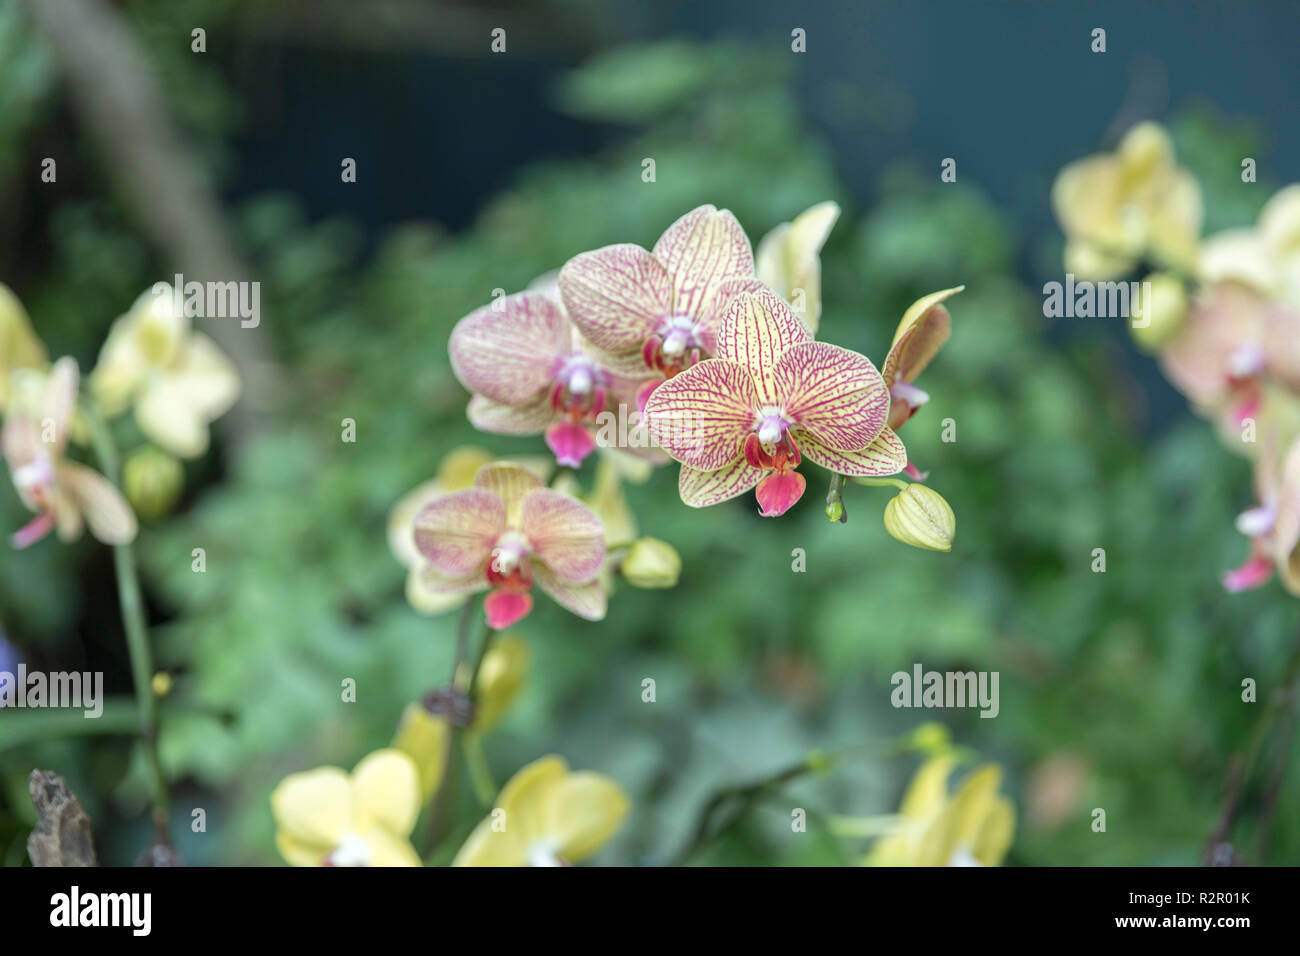 Singapore, Gardens by the Bay, Cloud Forest Dome, orchid flowers Stock Photo